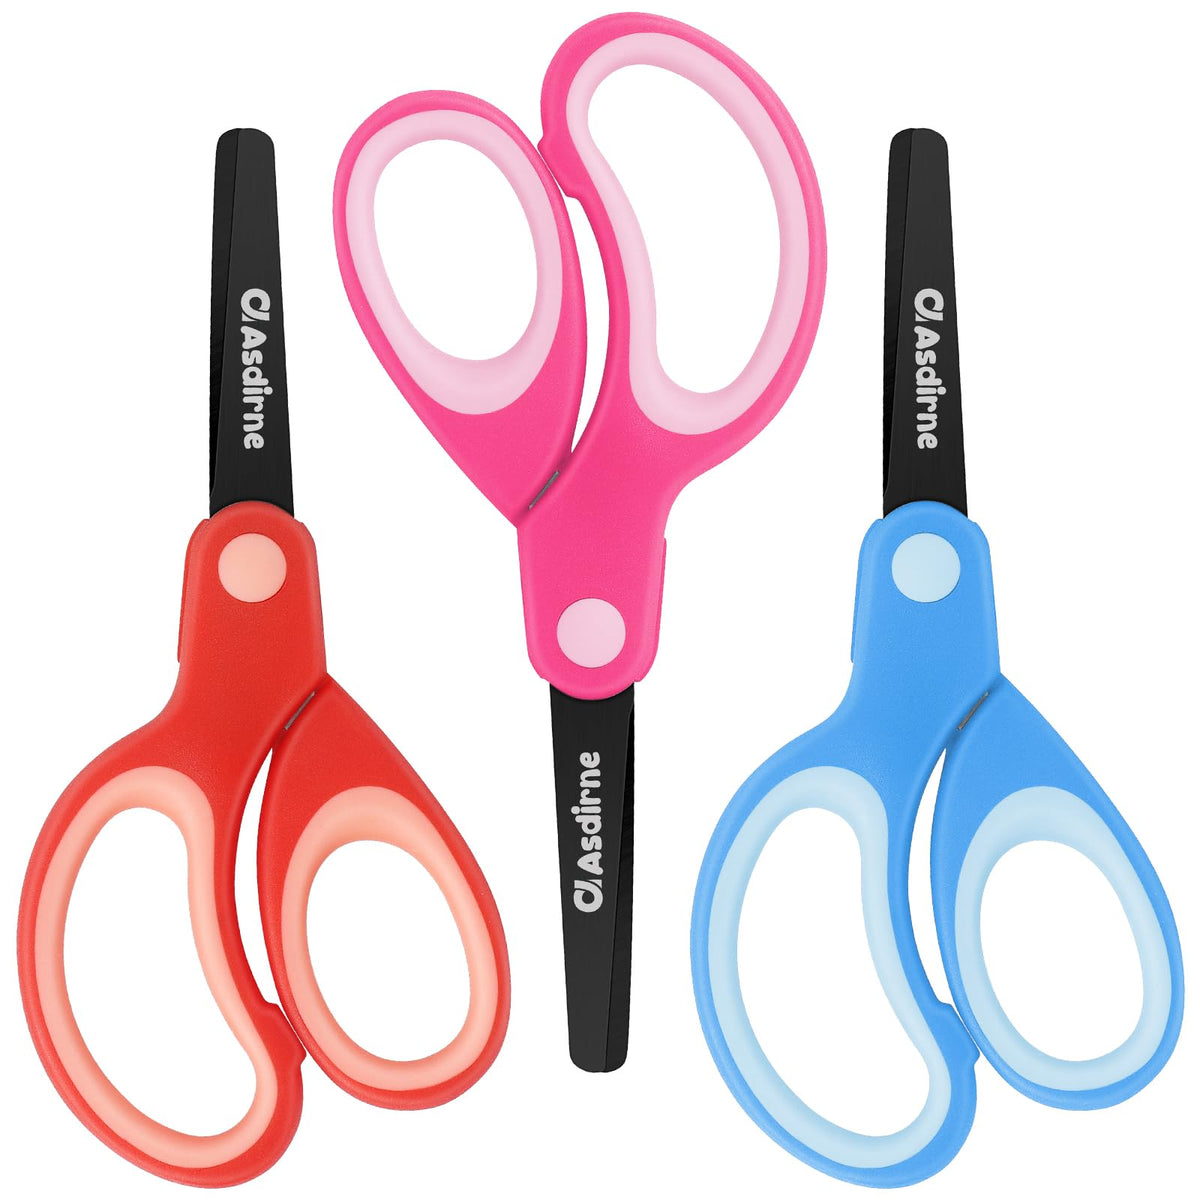 Asdirne Left Handed Kids Scissors, Safety Children Scissors, Craft Scissors with Blunt Tip Stainless Steel Blades and Soft Grip, Great for Home and School, Assorted Color, 13.5cm, 3 Pack